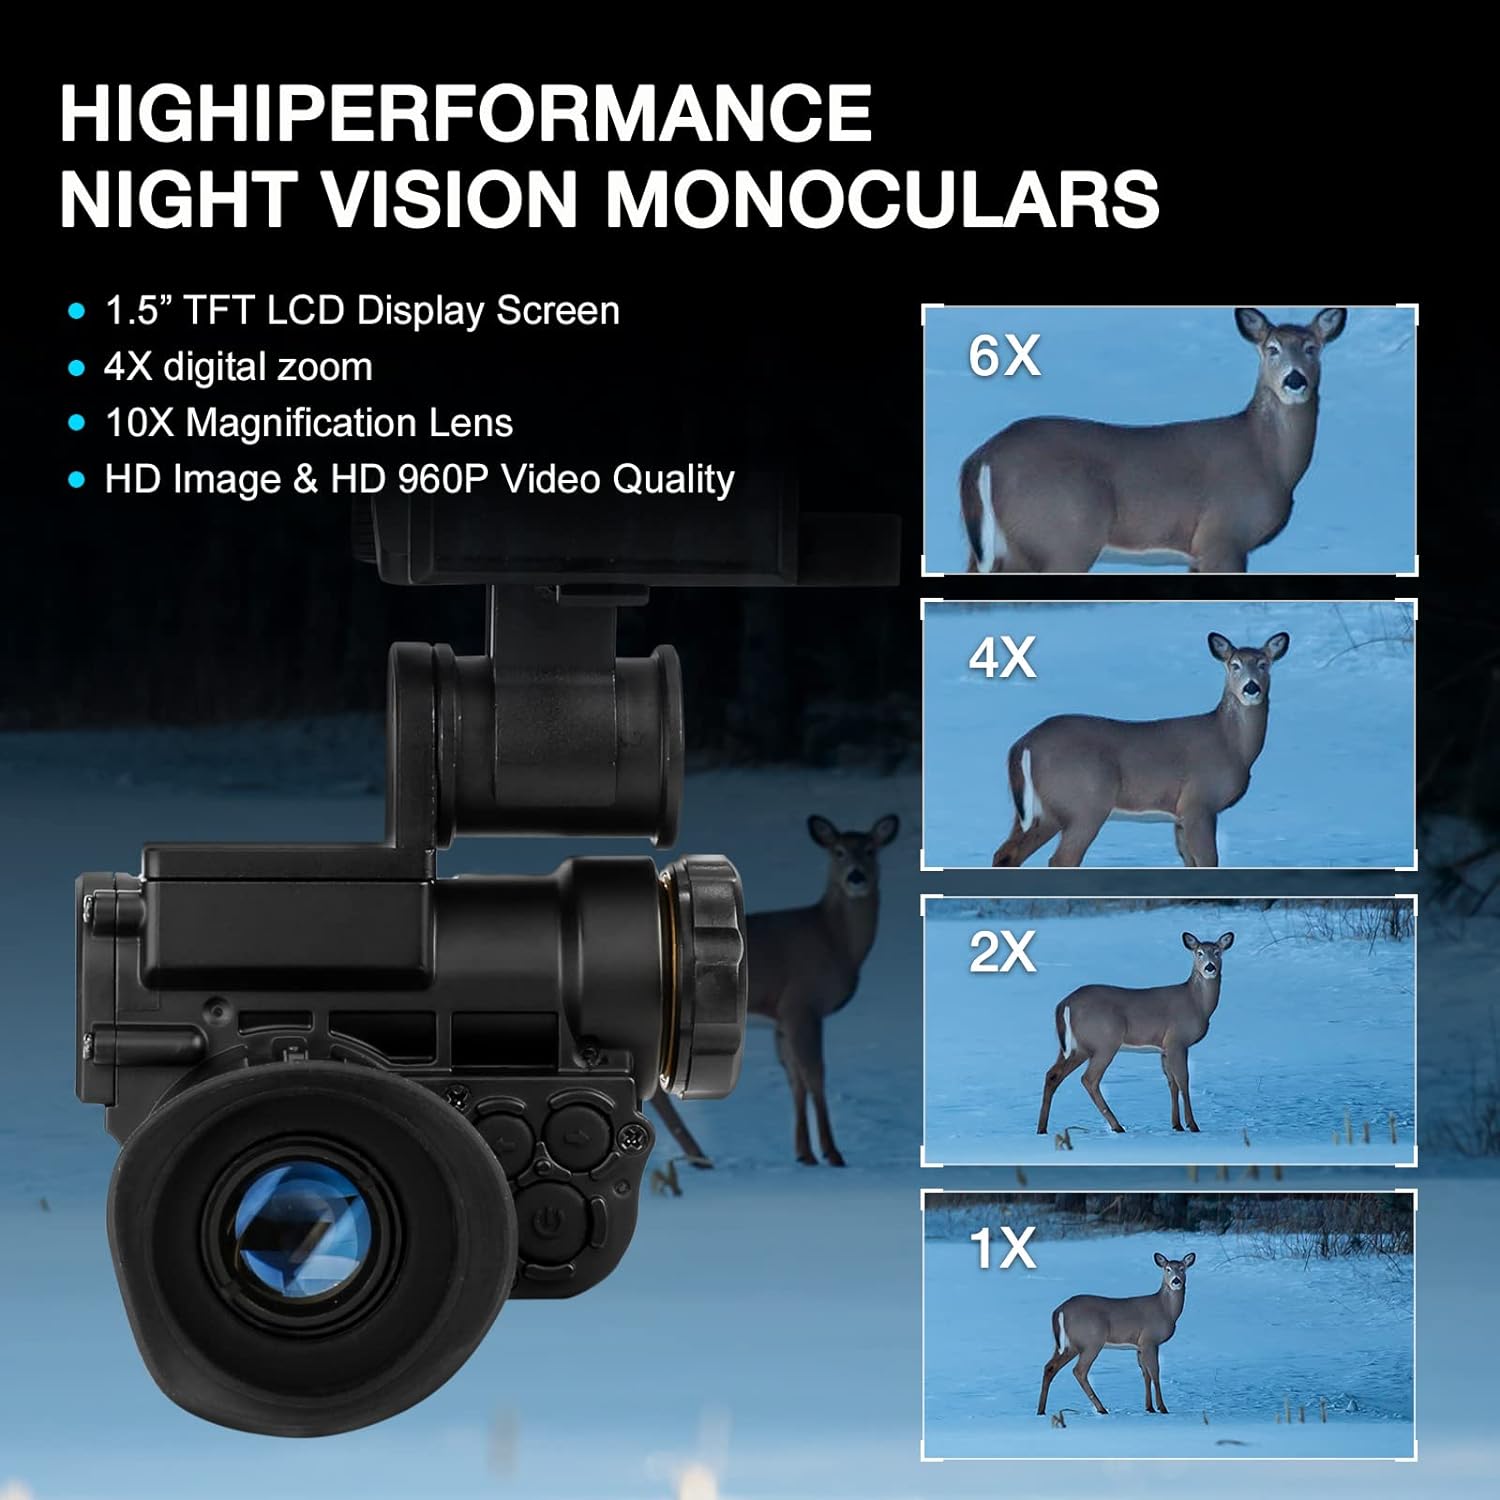 Digital Night Vision Monocular with Helmet Mount, Infrared Night Vision Camcorder Take Photos and Videos Playback Function, Suitable for Hunting and Surveillance, Wildlife Observation